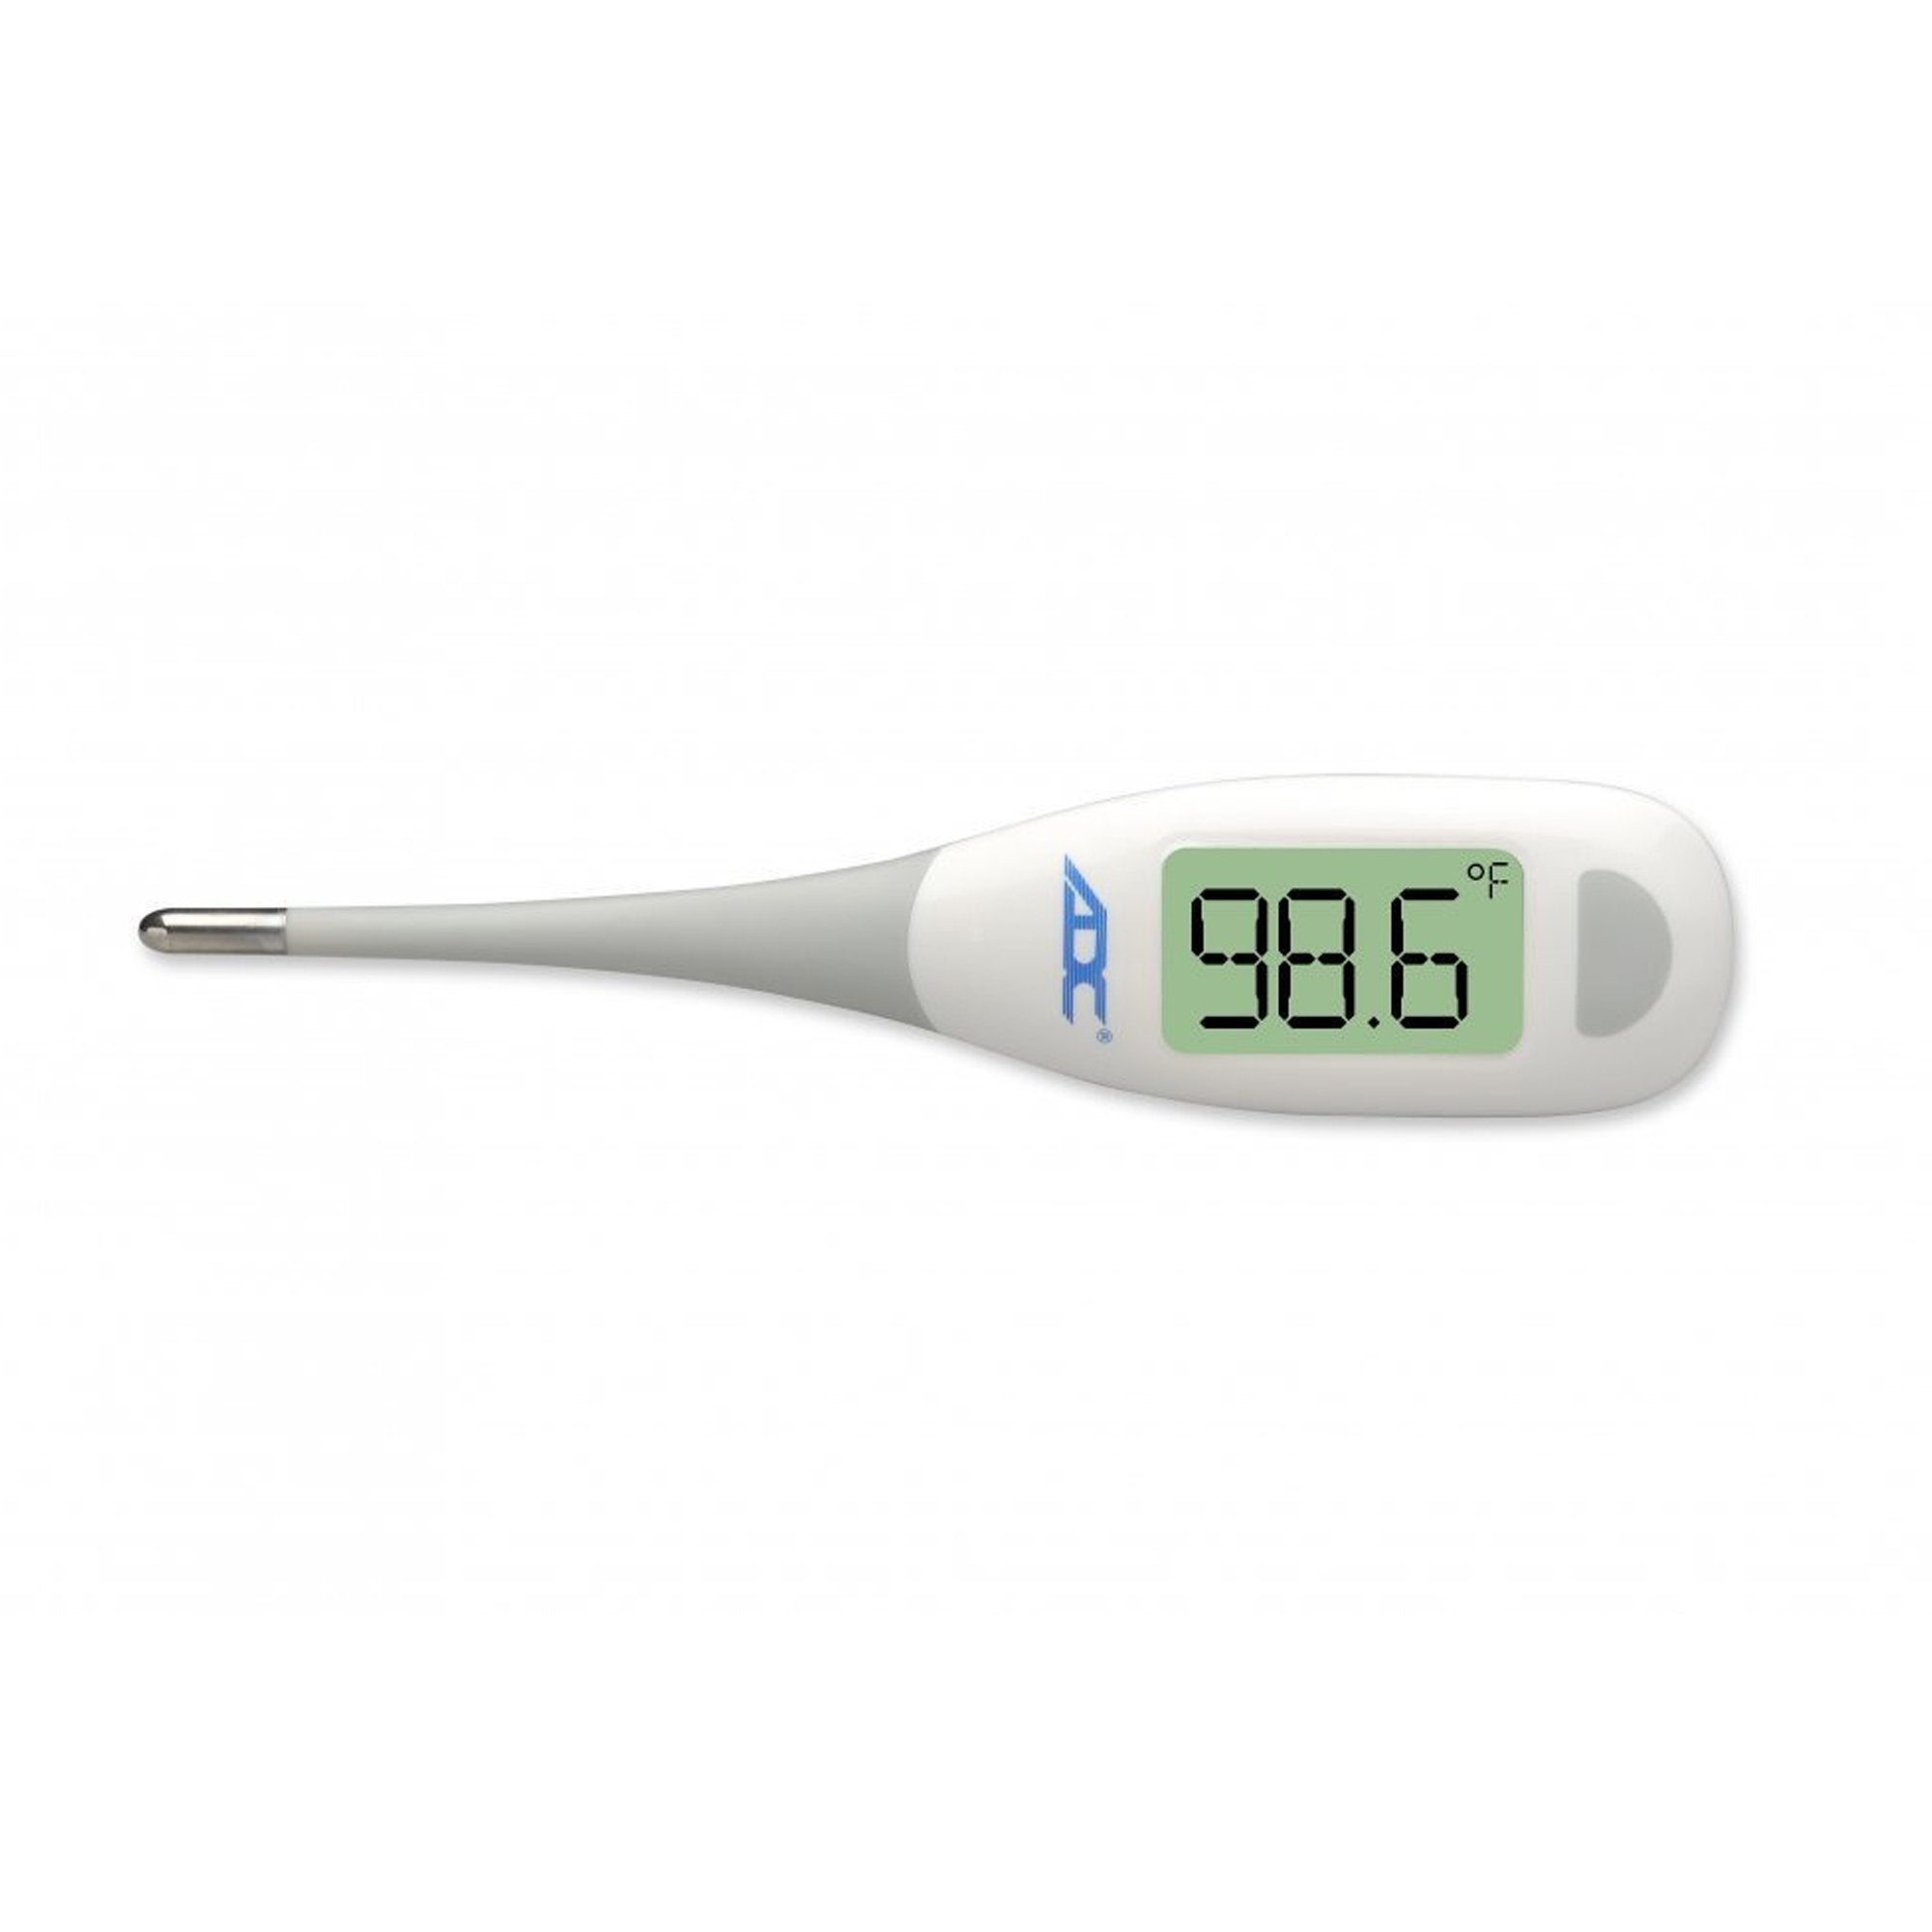 Digital Stick Thermometer Adtemp Oral / Rectal / Axillary Probe Handheld